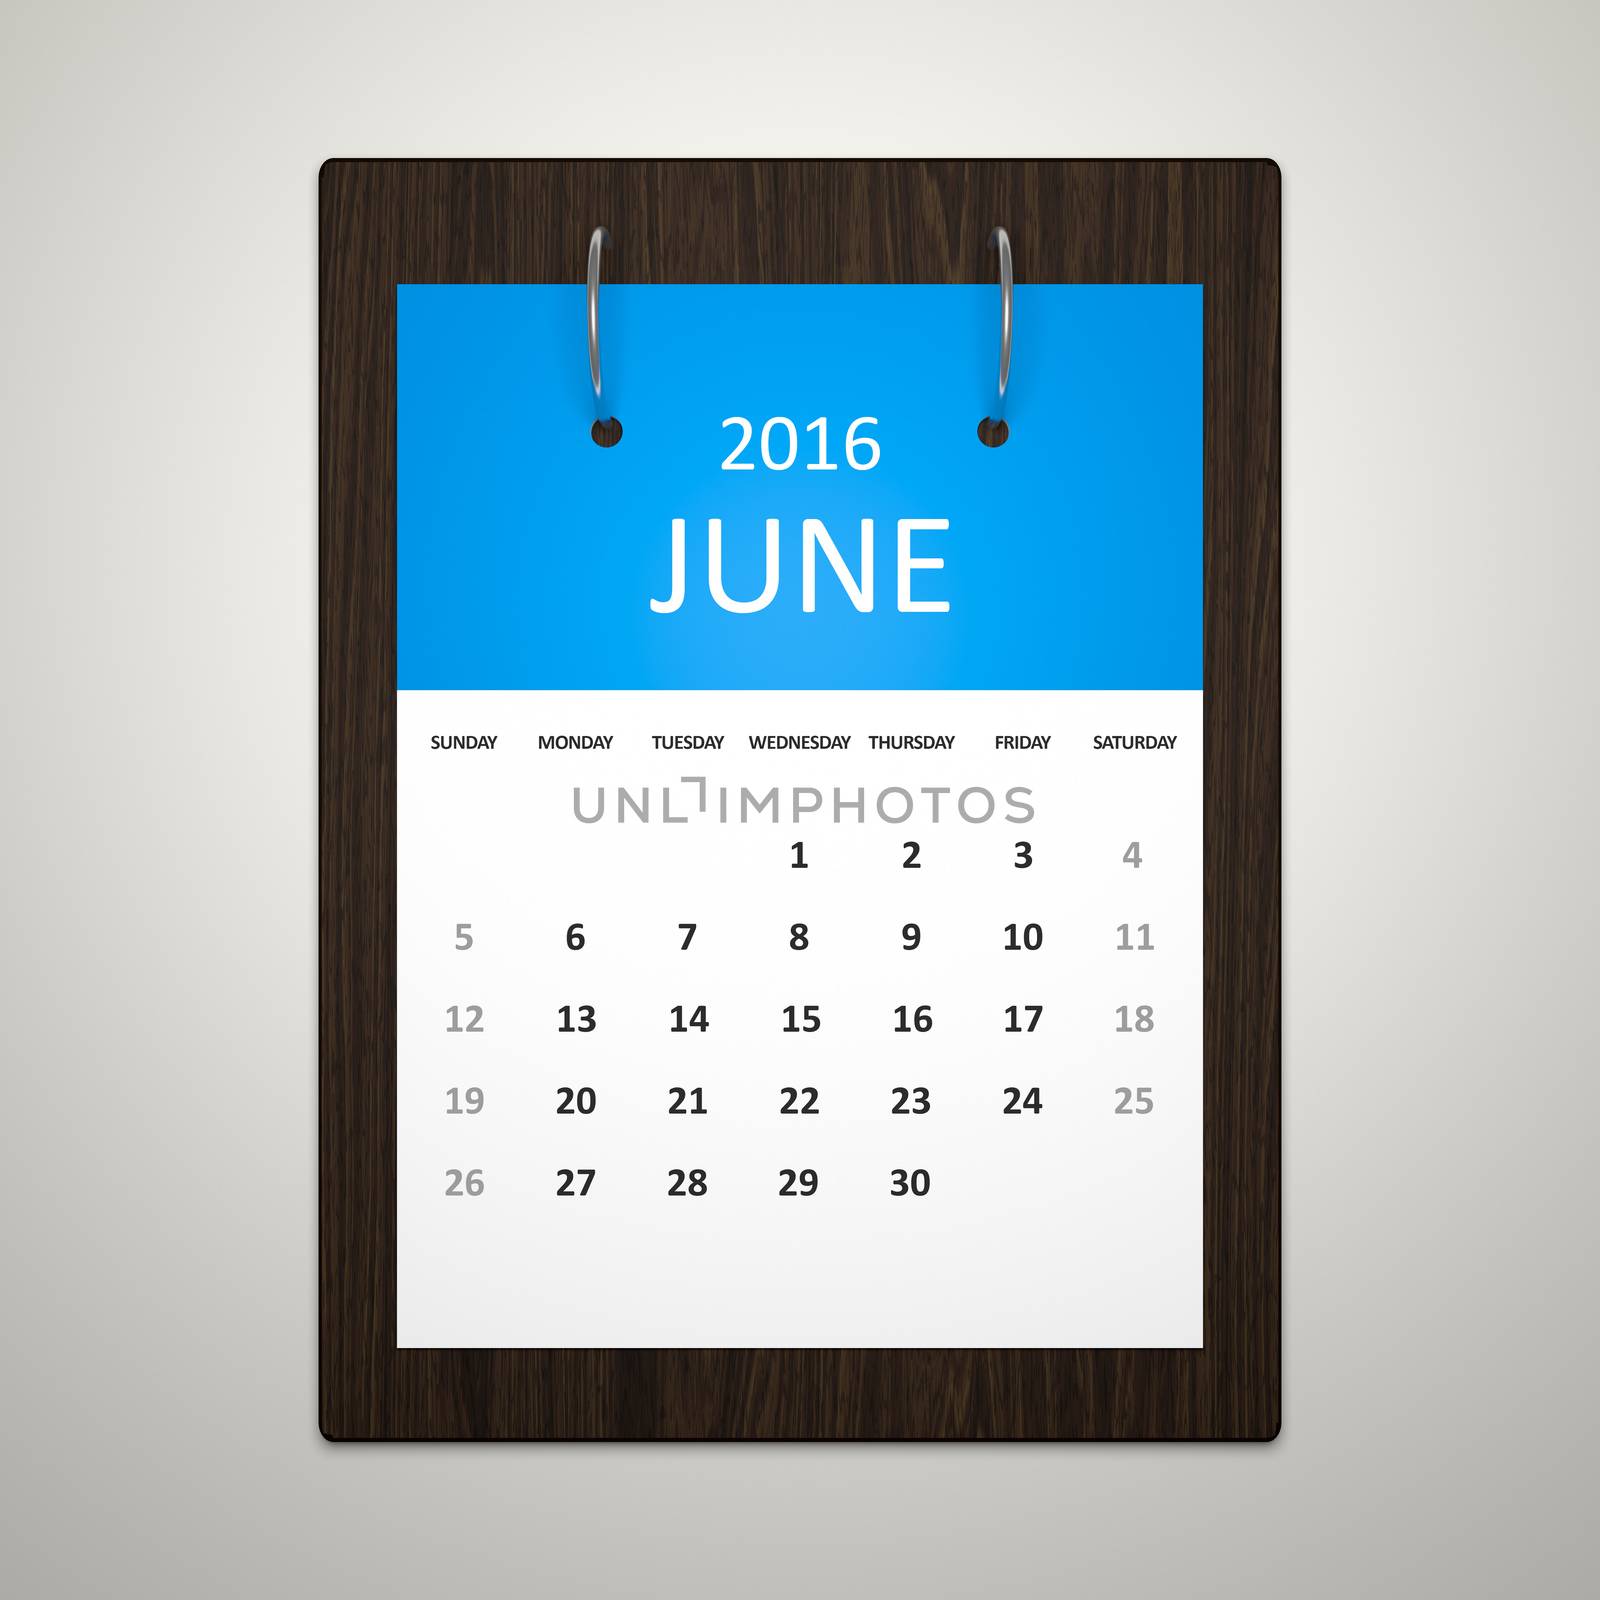 An image of a stylish calendar for event planning 2016 june